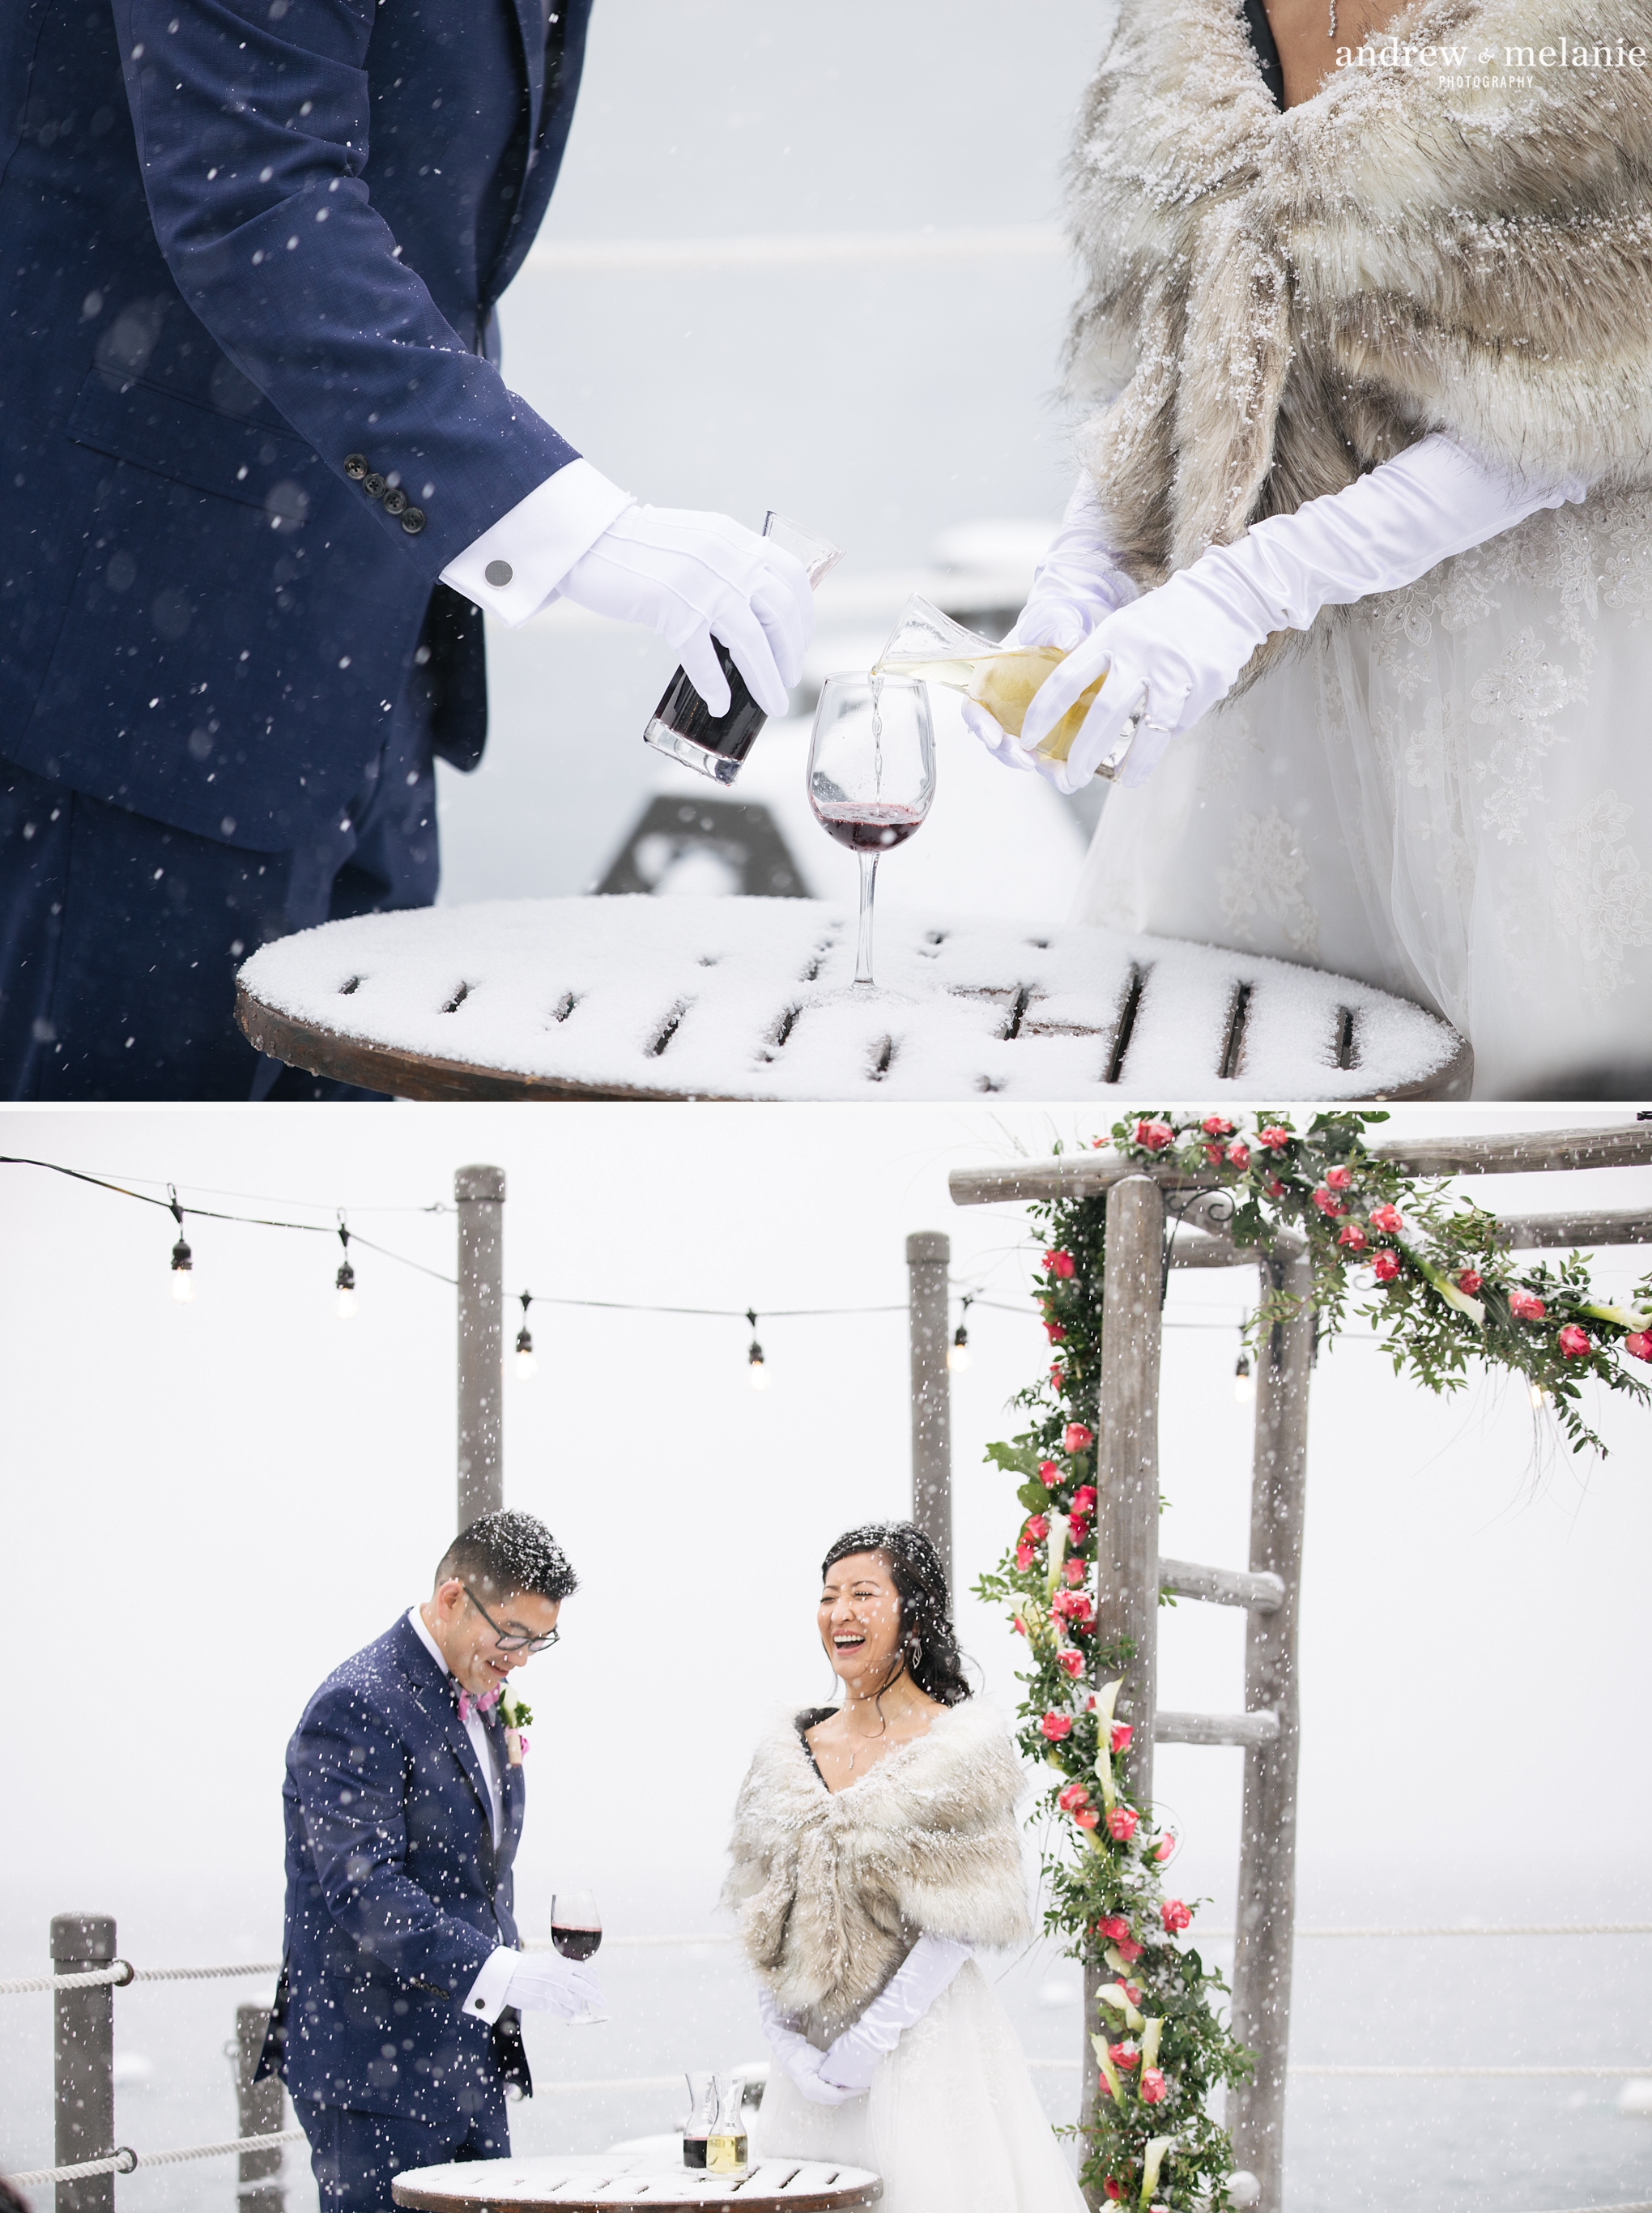 Lake Tahoe snowy wedding photos at West Shore Cafe